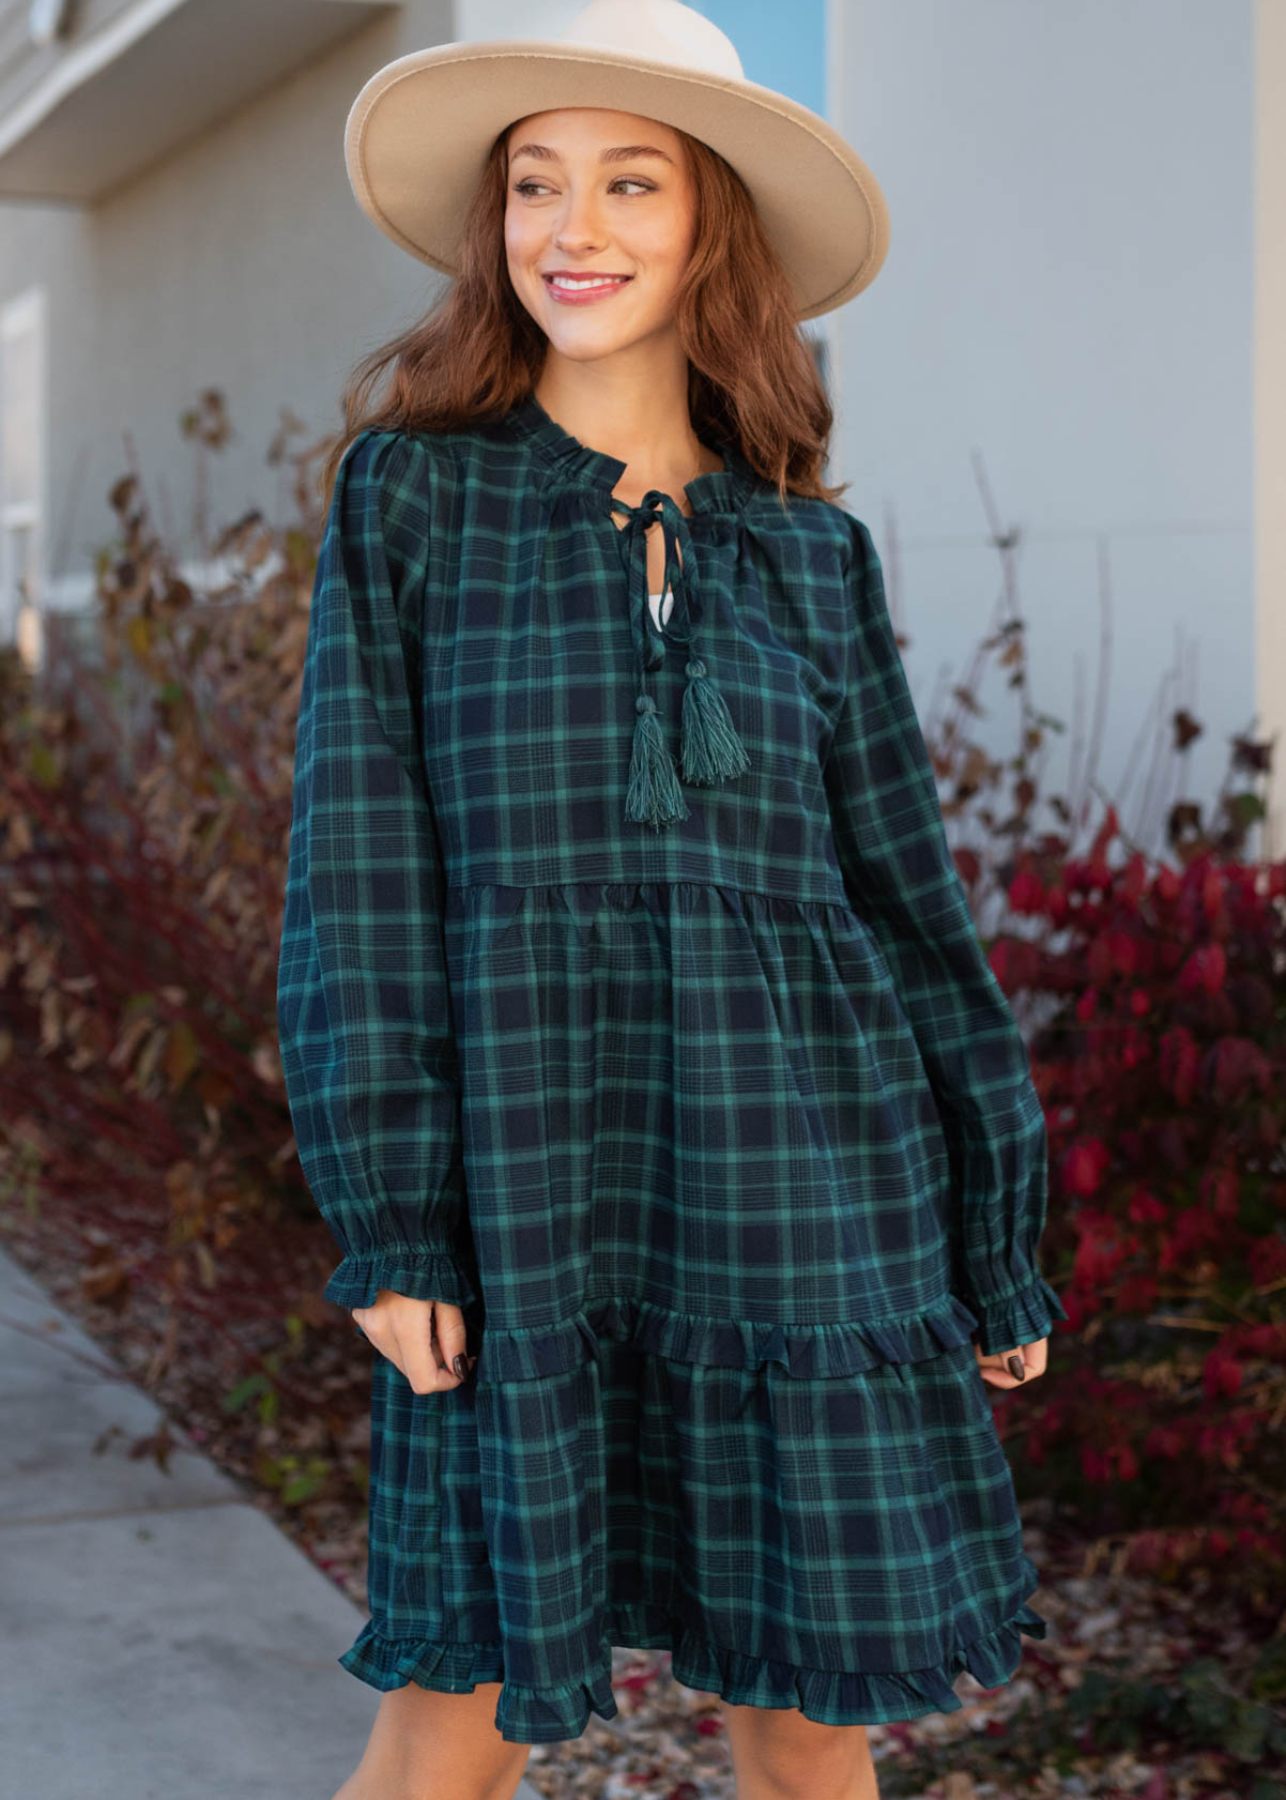 Plaid hunter green tiered dress with tiered skirt